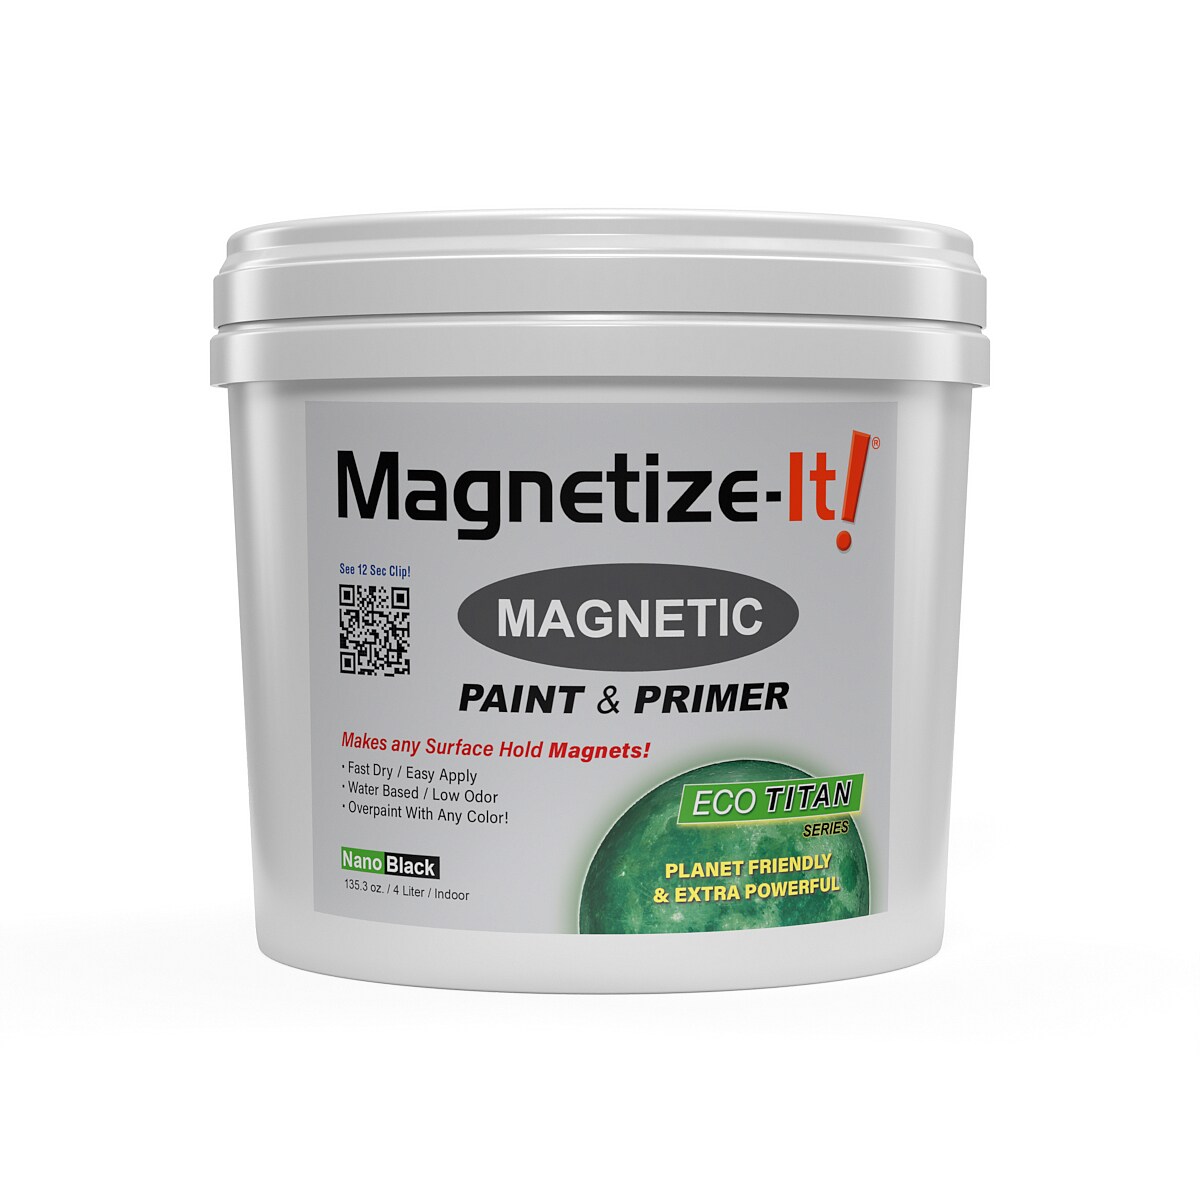 Magnetize-It! Magnetic Paint & Primer (Water Based) - Standard S Yield  16oz